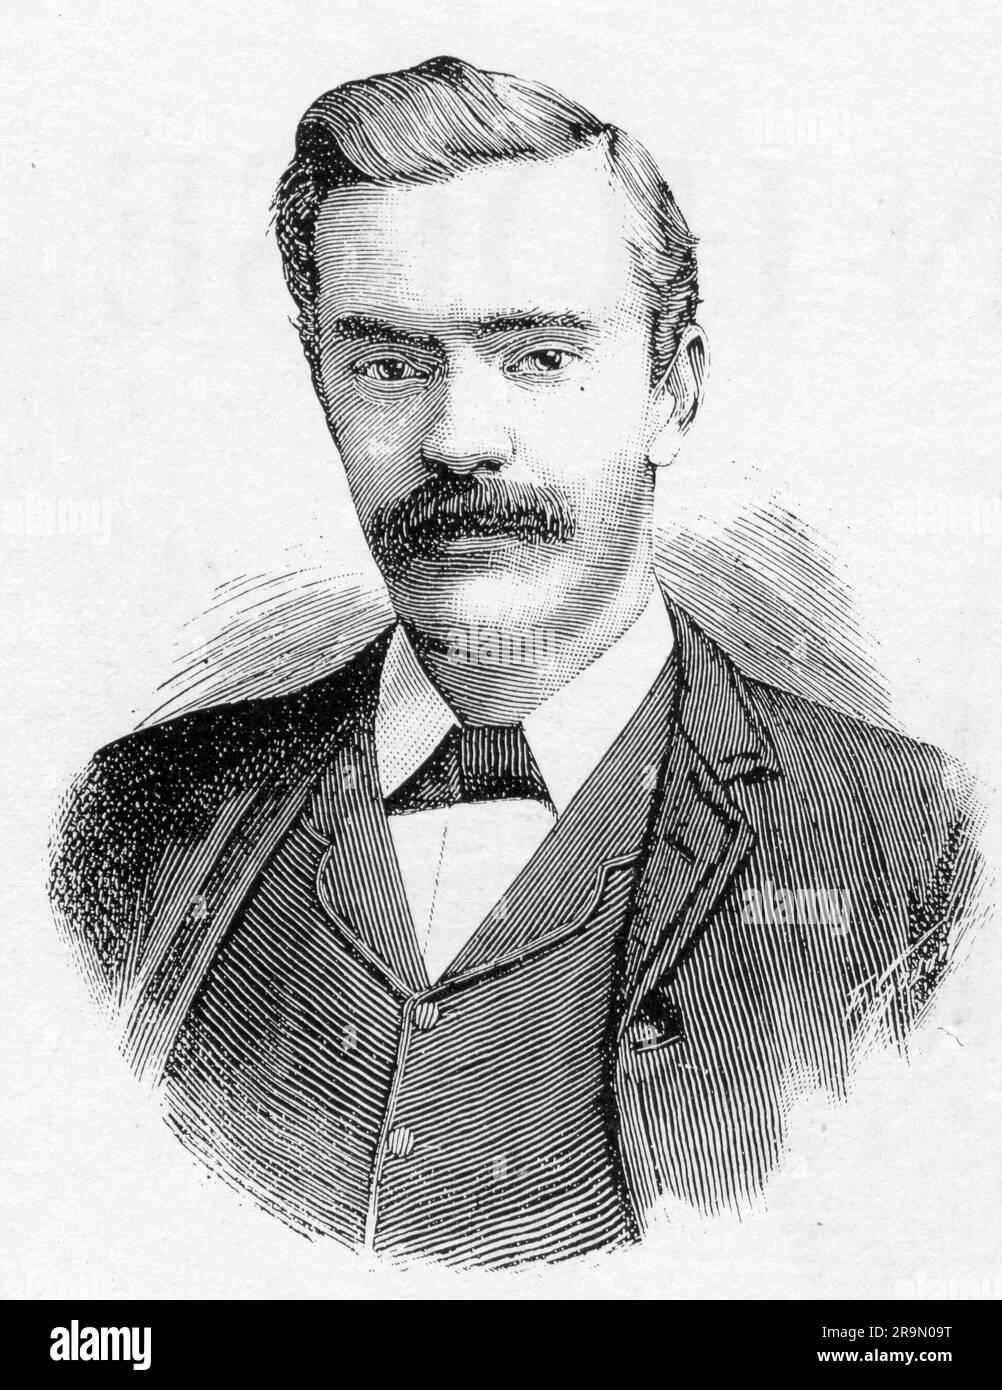 Wood, George Arnold, 7.6.1865 - 14.10.1928, Australian historian, wood engraving, circa 1900, ARTIST'S COPYRIGHT HAS NOT TO BE CLEARED Stock Photo